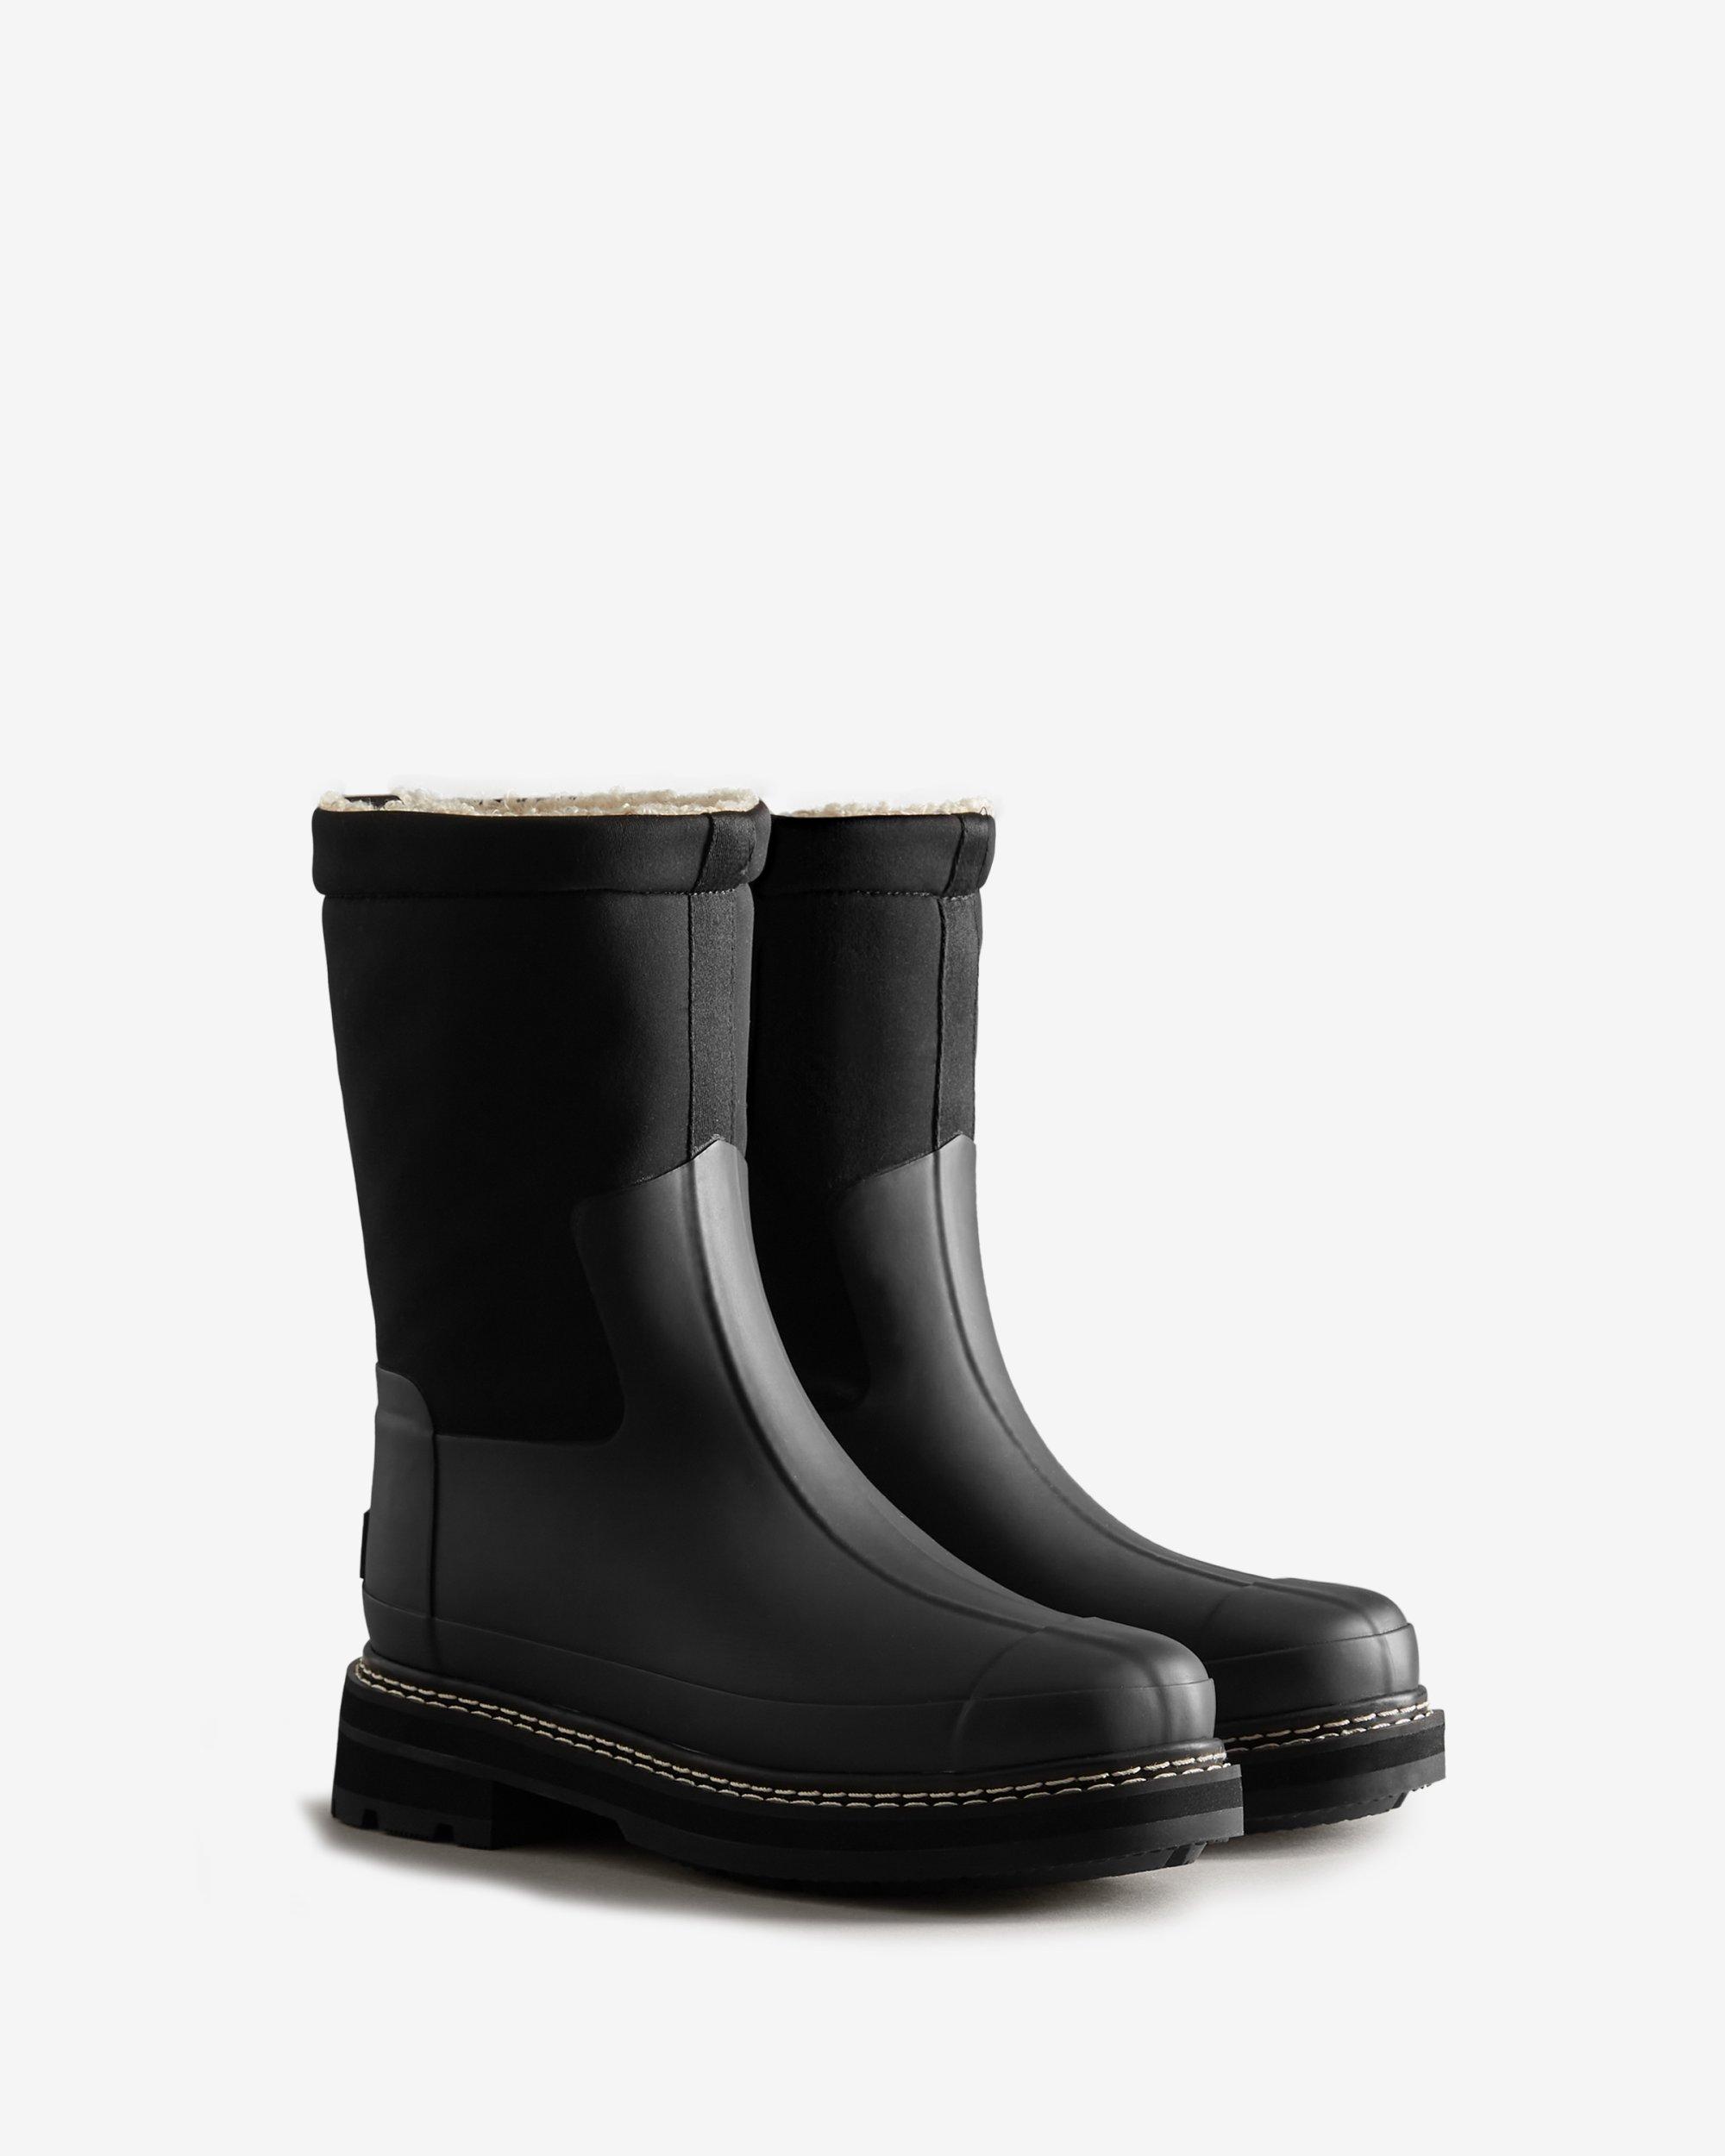 HUNTER Refined Stitch Roll Top Vegan Shearling Boots in Black | Lyst